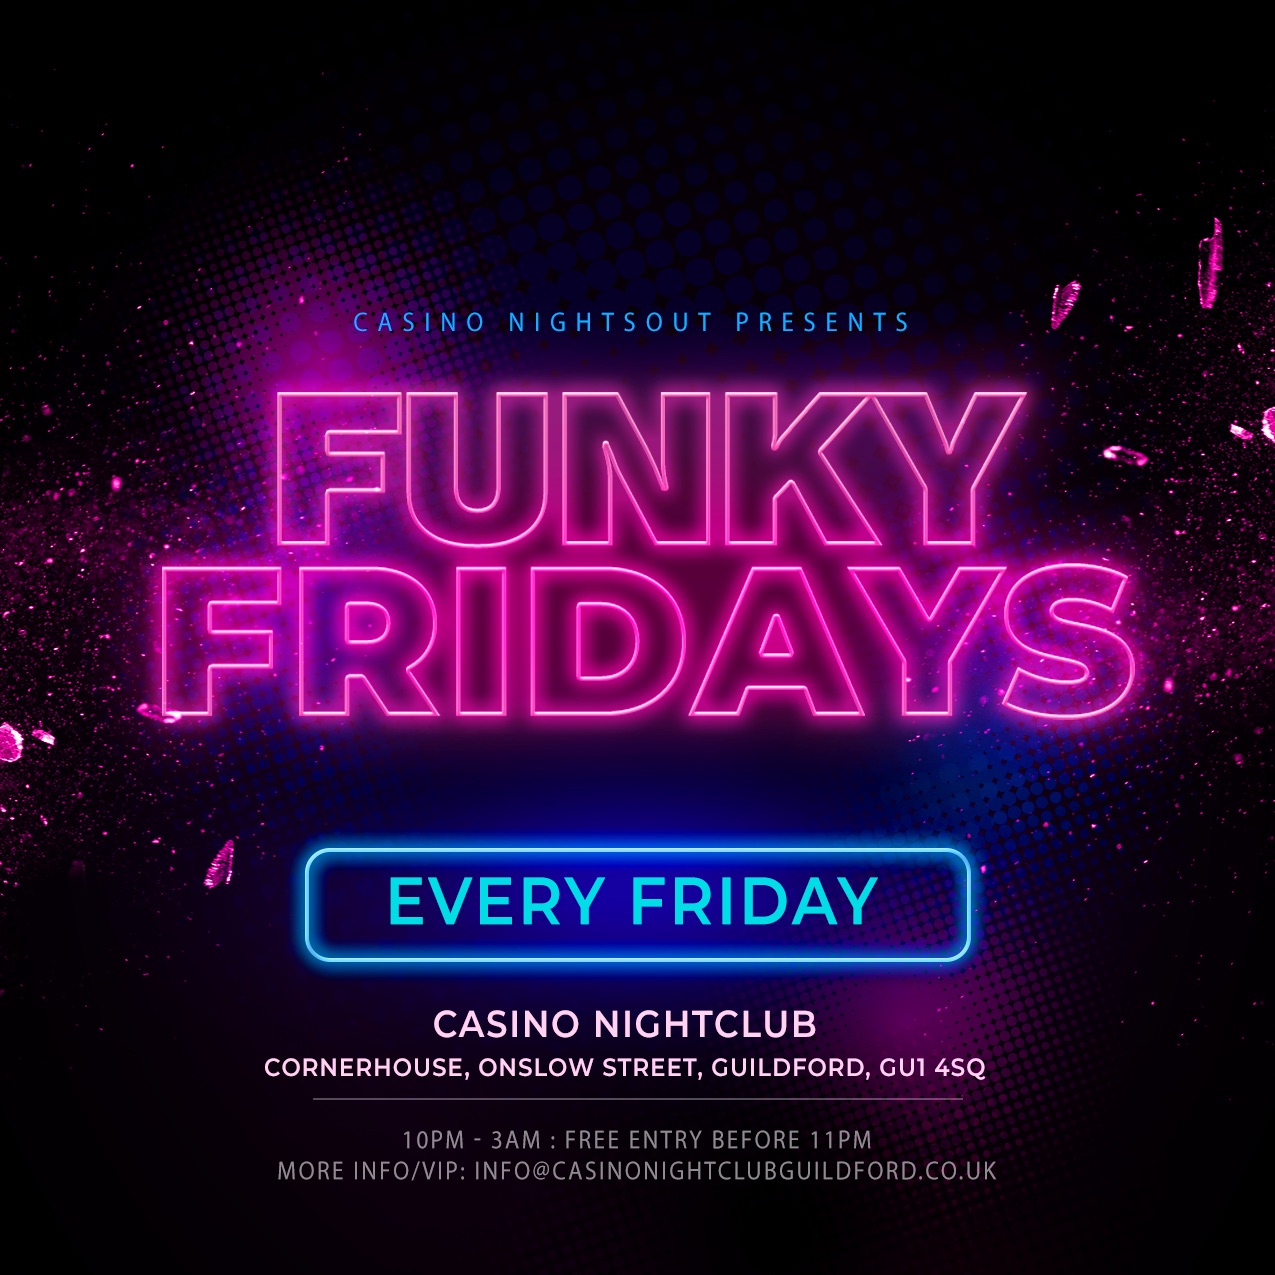 FUNKY FRIDAYS at Casino Nightclub, Guildford on 13th May 2022